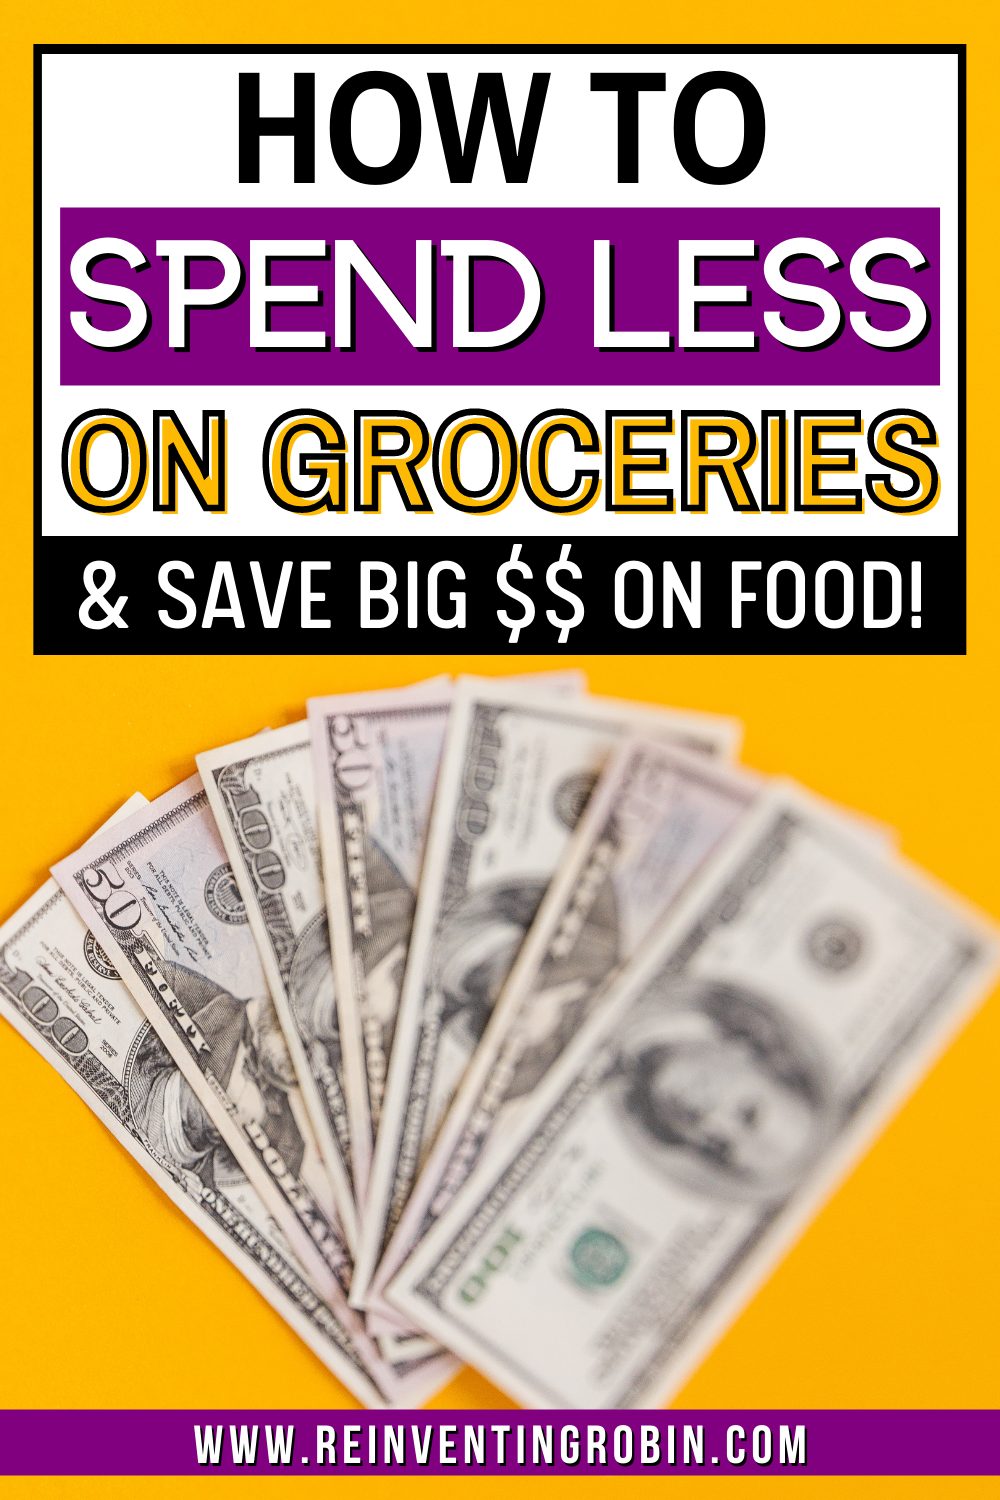 Text says: How to Spend Less Money On Groceries & Save big Money on Food! With a photo of dollar bills in the background.